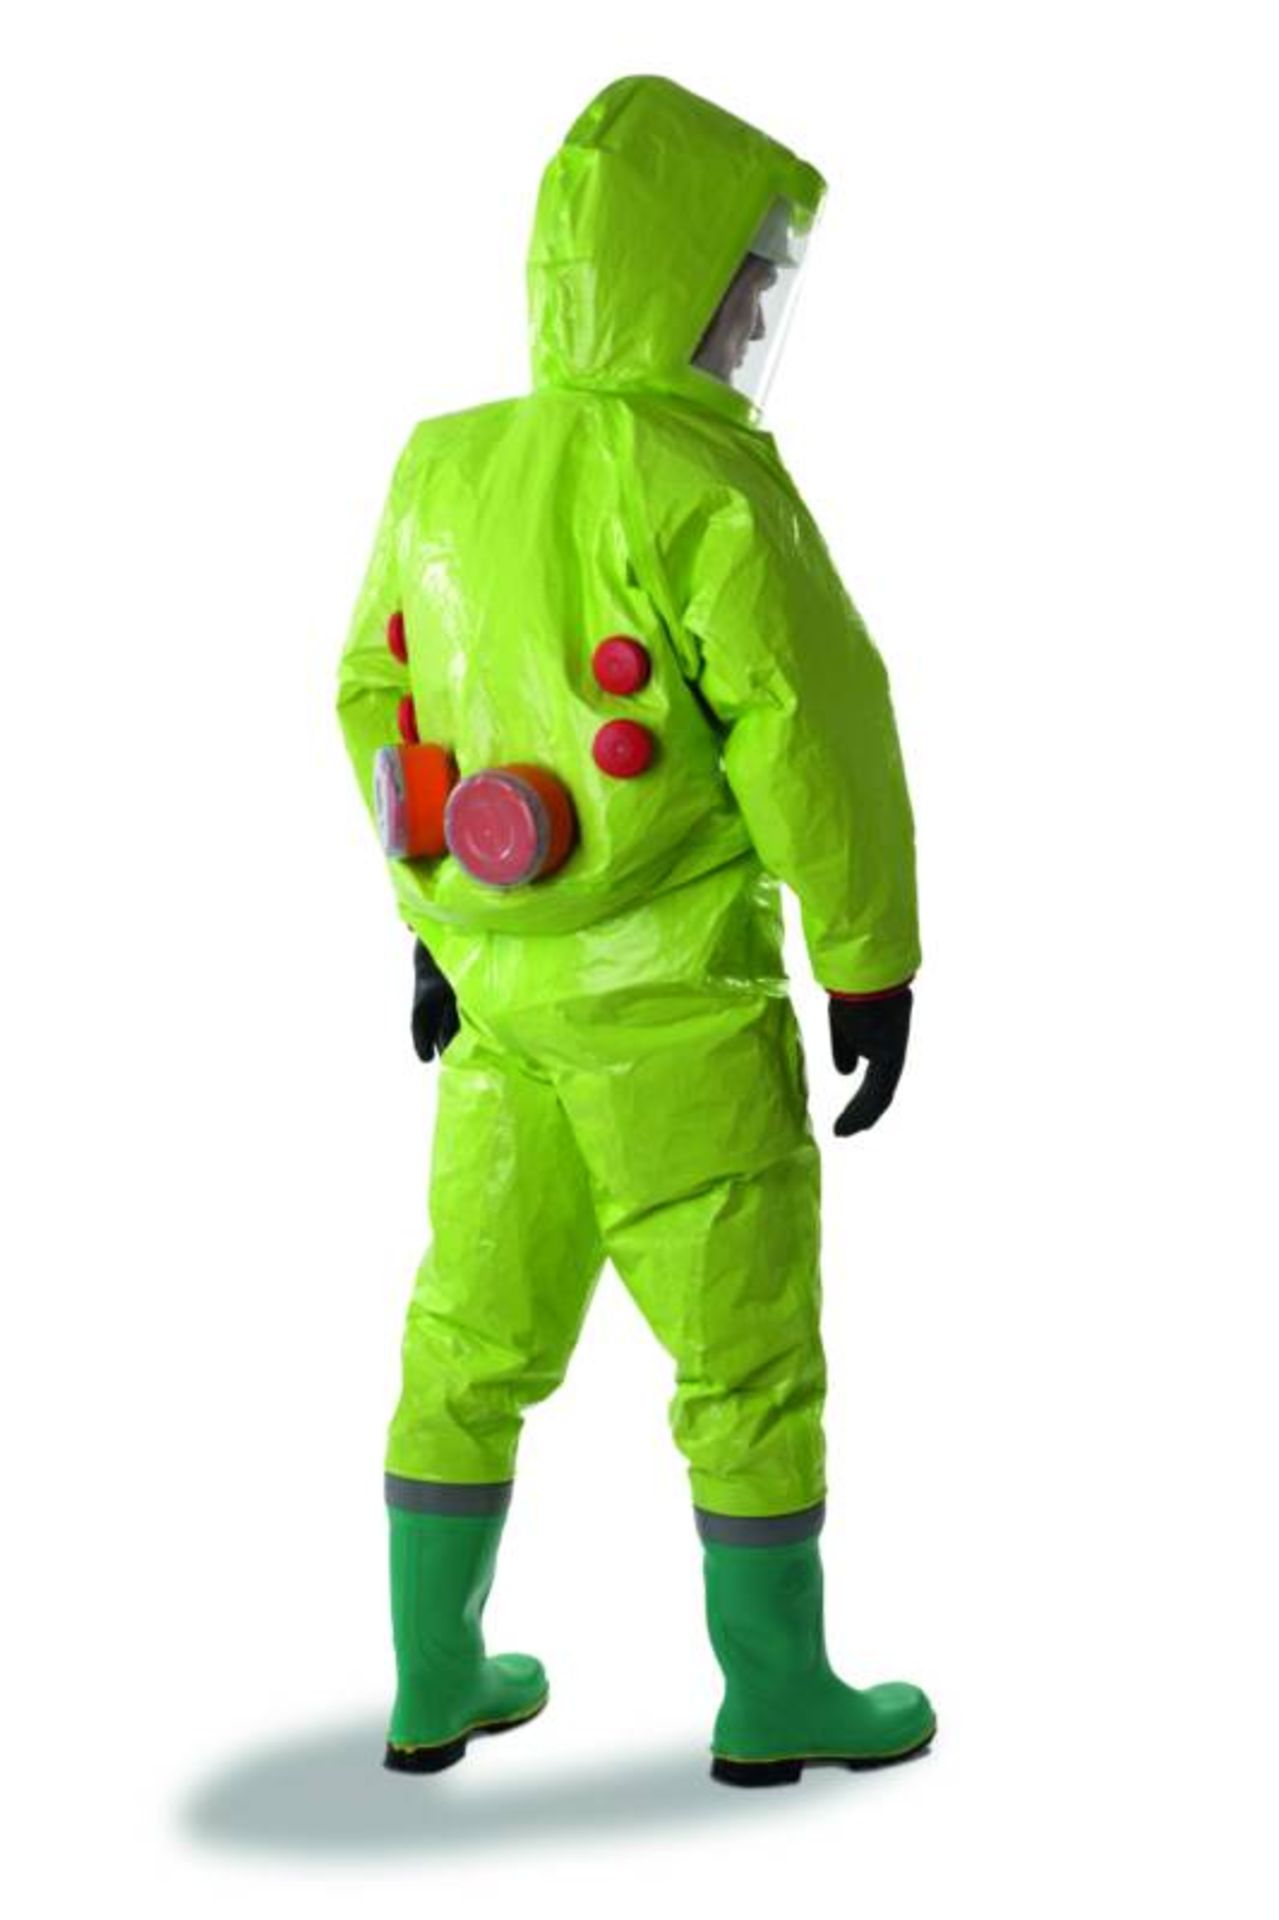 Respirex Powered Decontamination Suit with Attached Boots and Gloves, Helmet, Filters, Battery etc - Image 2 of 17